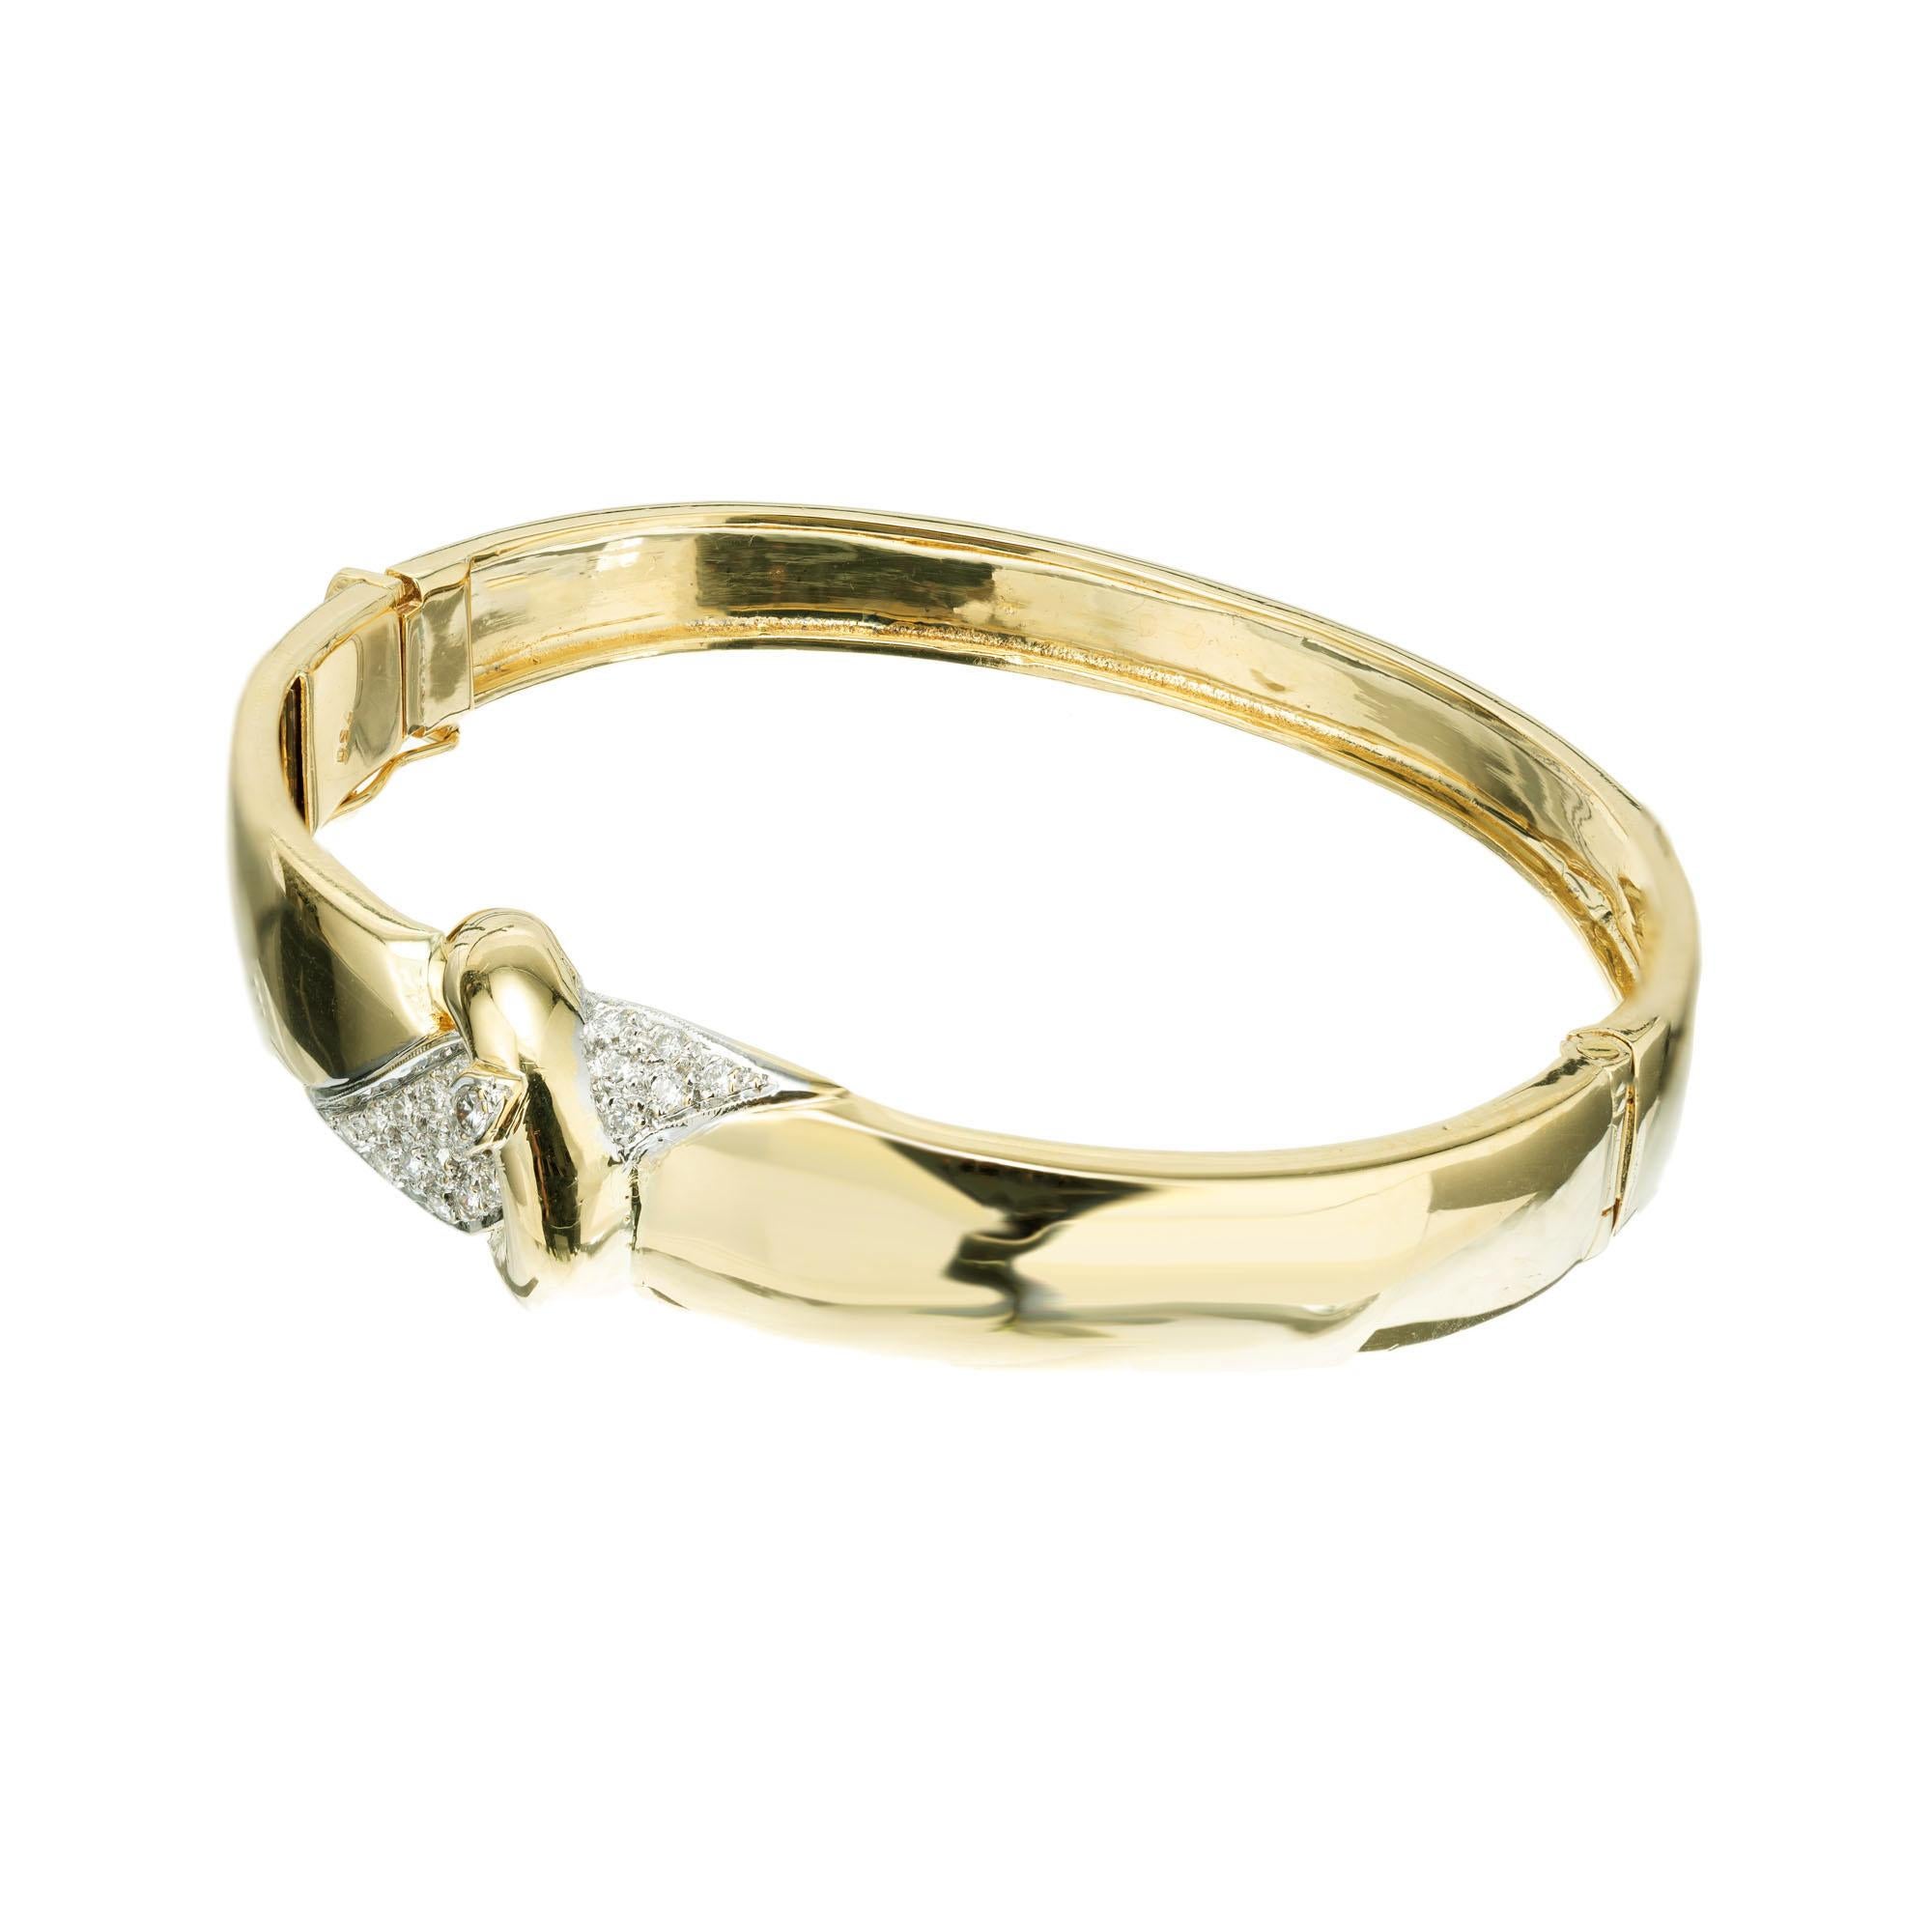 Diamond bangle bracelet. 18k yellow gold hinged bracelet with a buckle design set with 20 round brilliant cut pave diamonds. Built in catch and side lock safety. Fits a 7 to 7.5 Inch wrist.

20 round brilliant cut diamonds, G VS approx. .30cts
18k